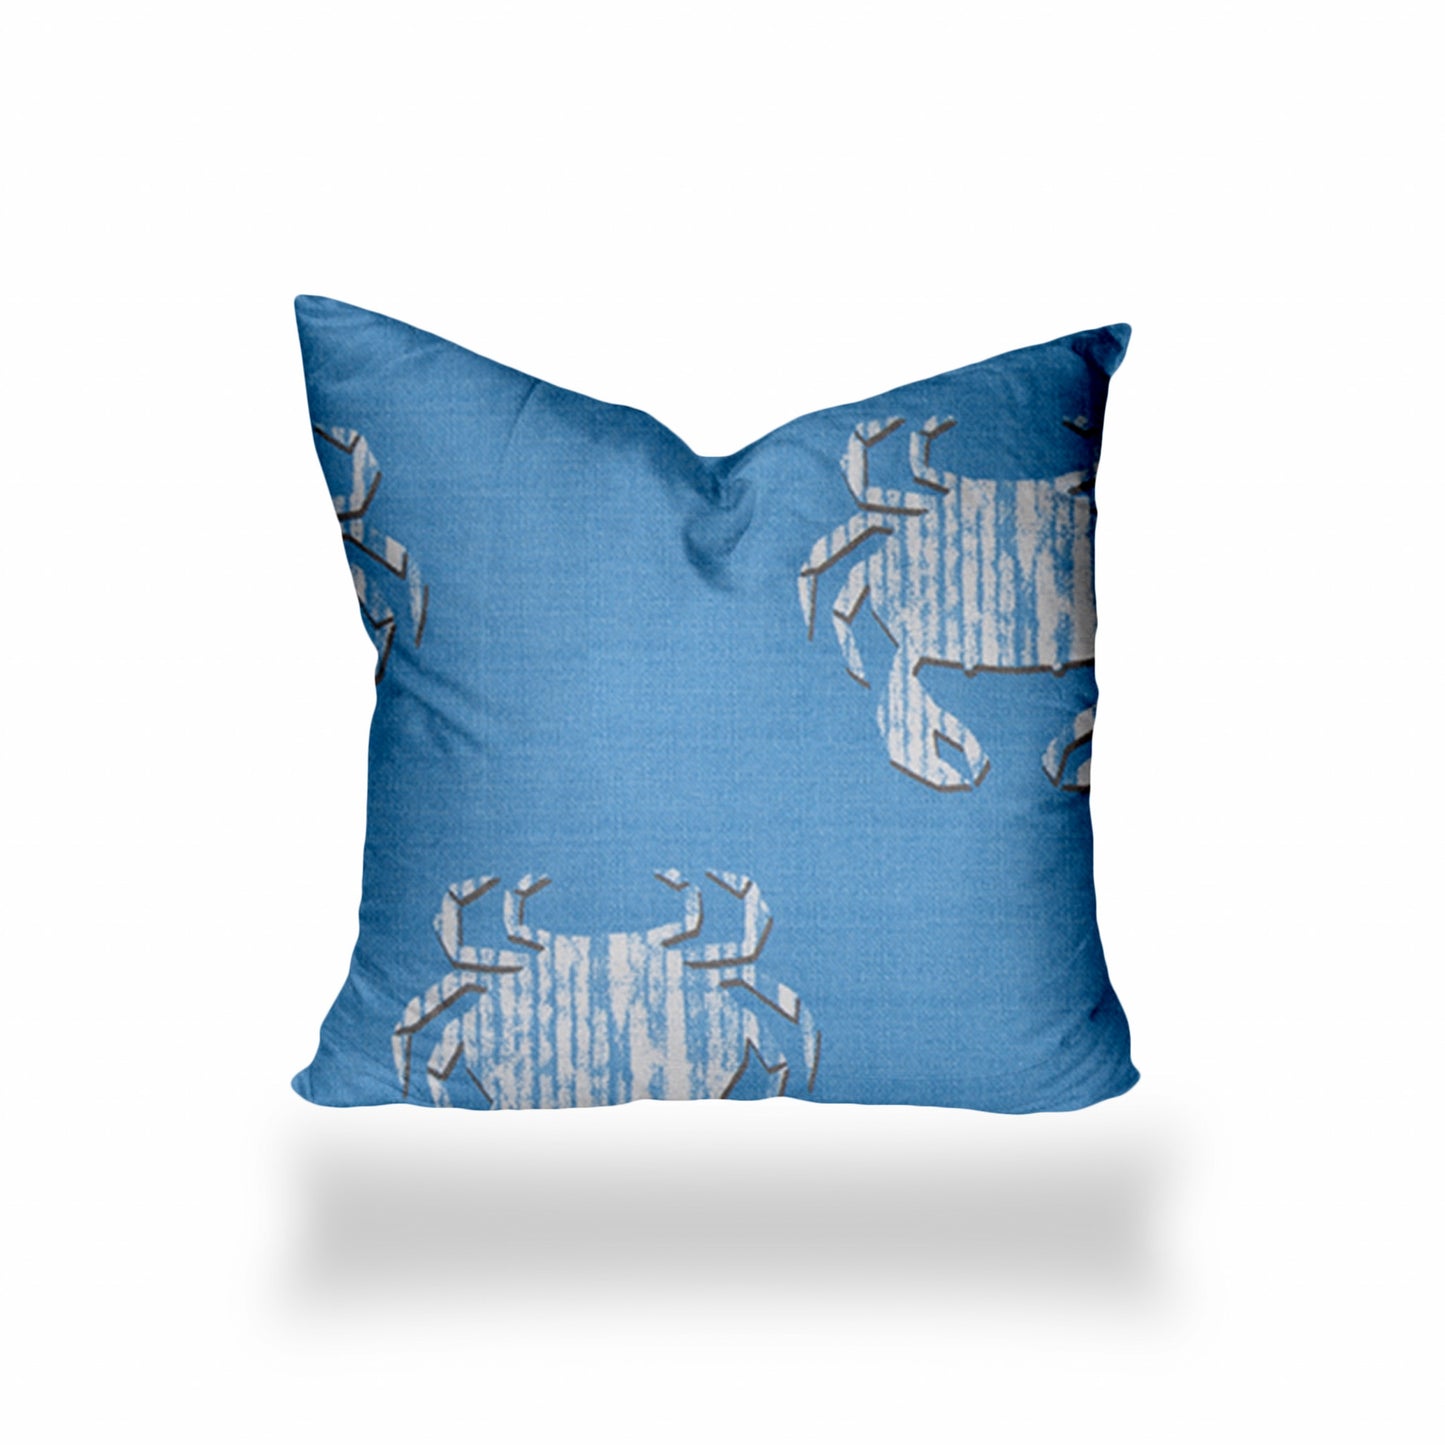 14" X 14" Blue And White Crab Enveloped Coastal Throw Indoor Outdoor Pillow